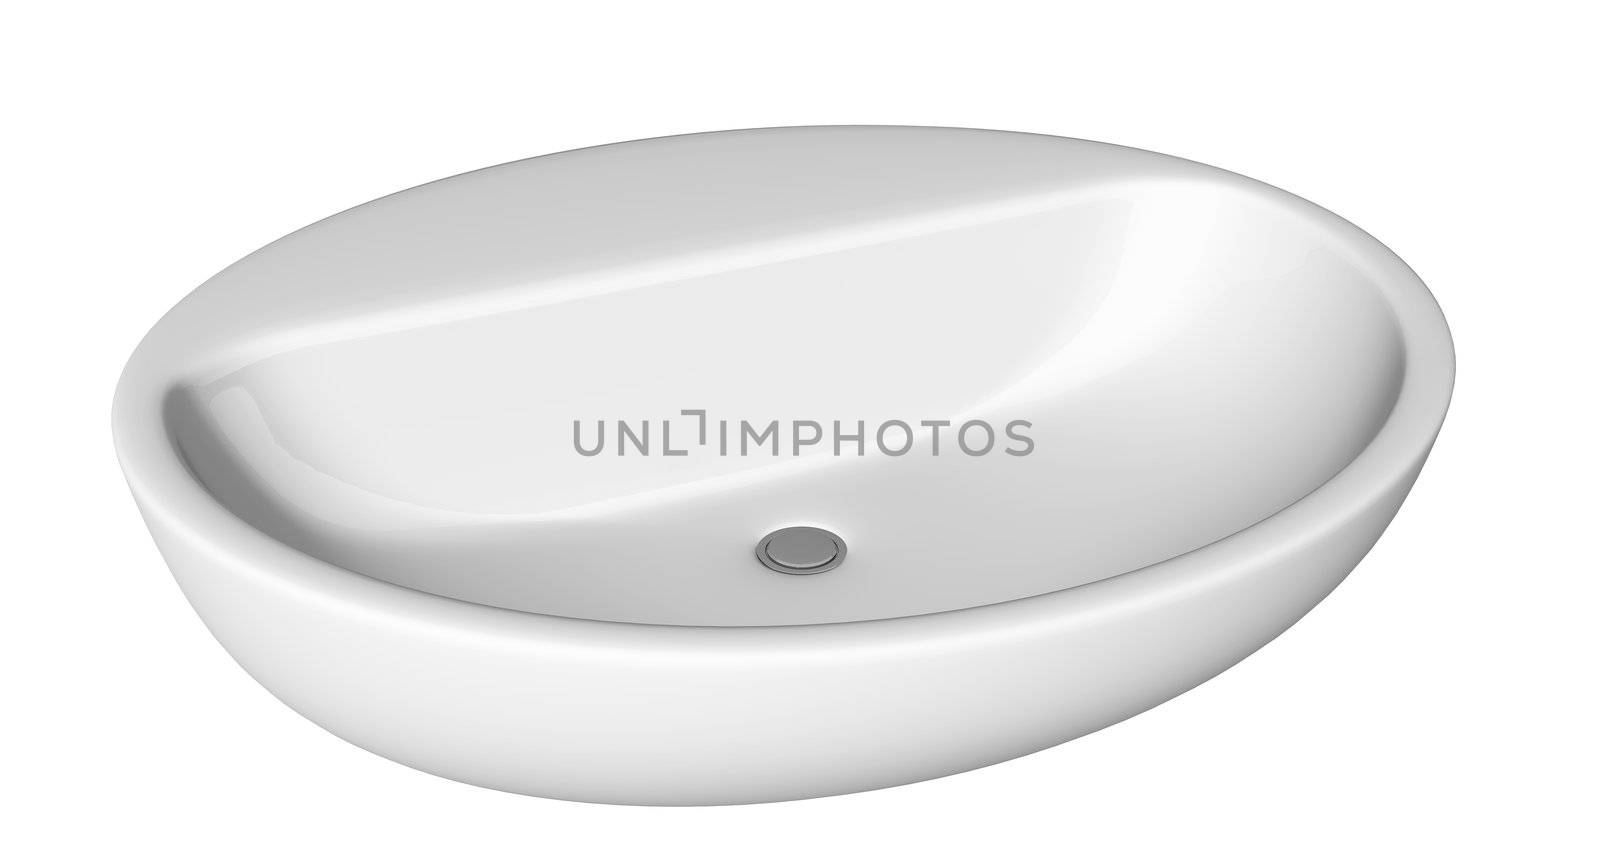 Egg-shaped and shallow washbasin or sink, isolated against a white background.